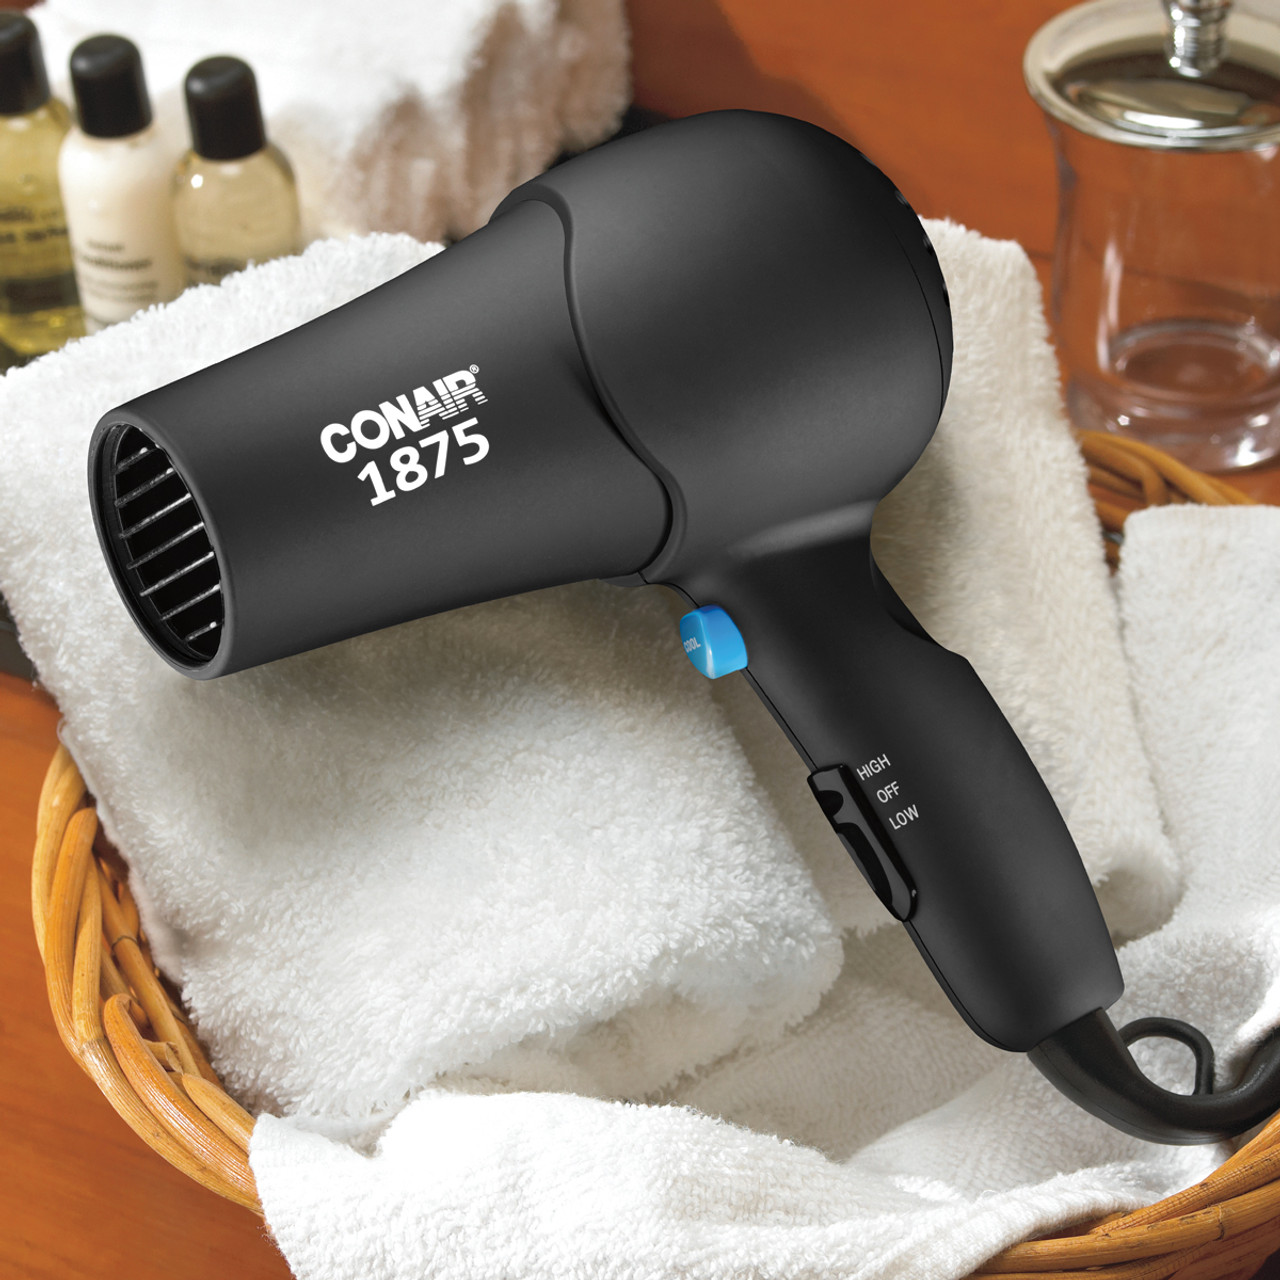 How To Clean Filter On Conair 1875 Hair Dryer